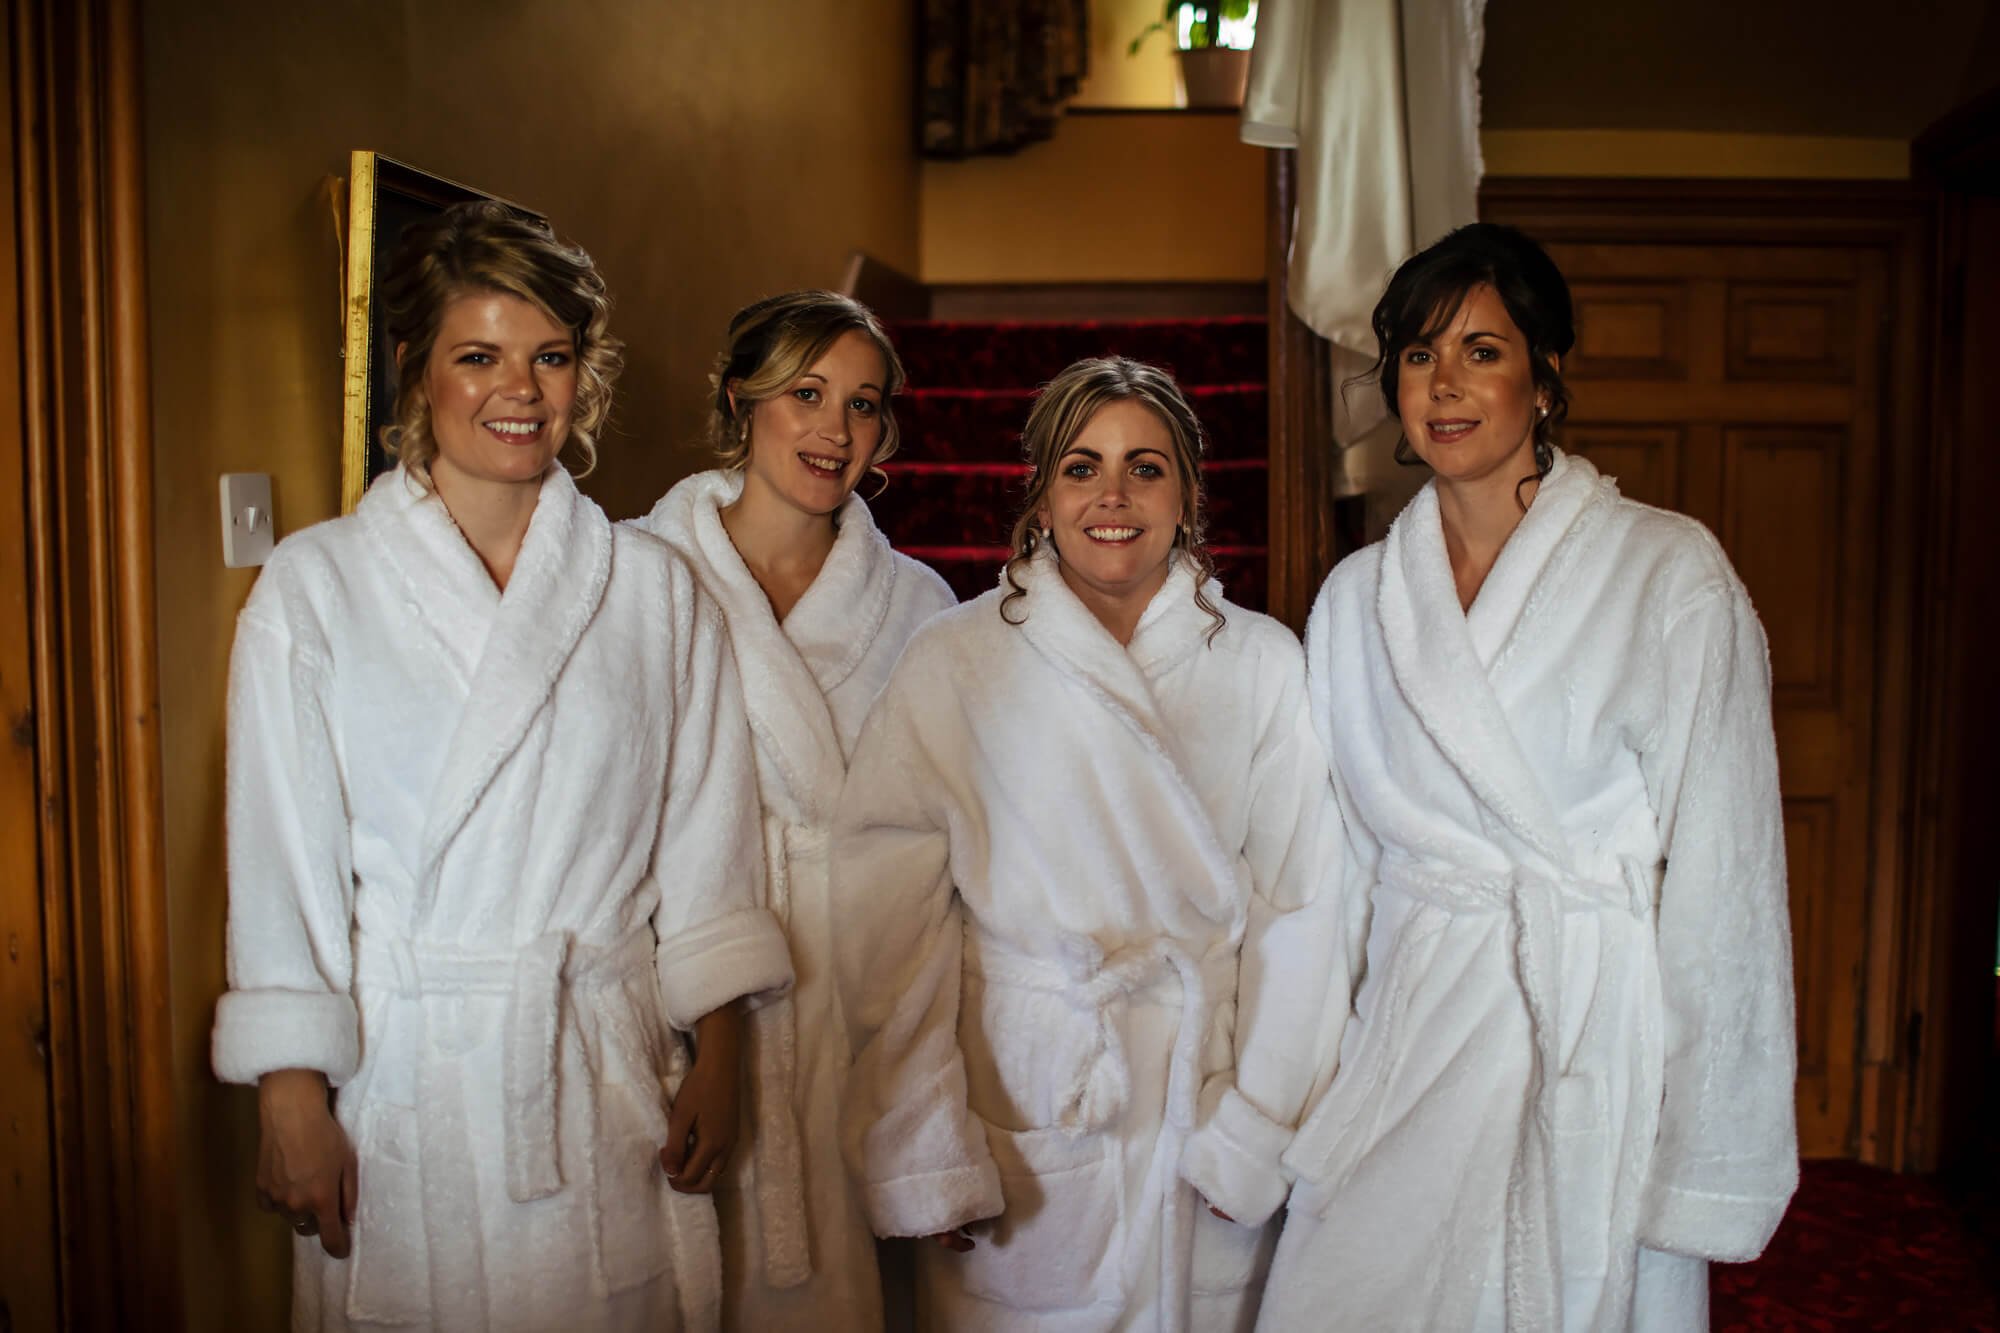 Bridesmaids in their dressing gowns before the wedding